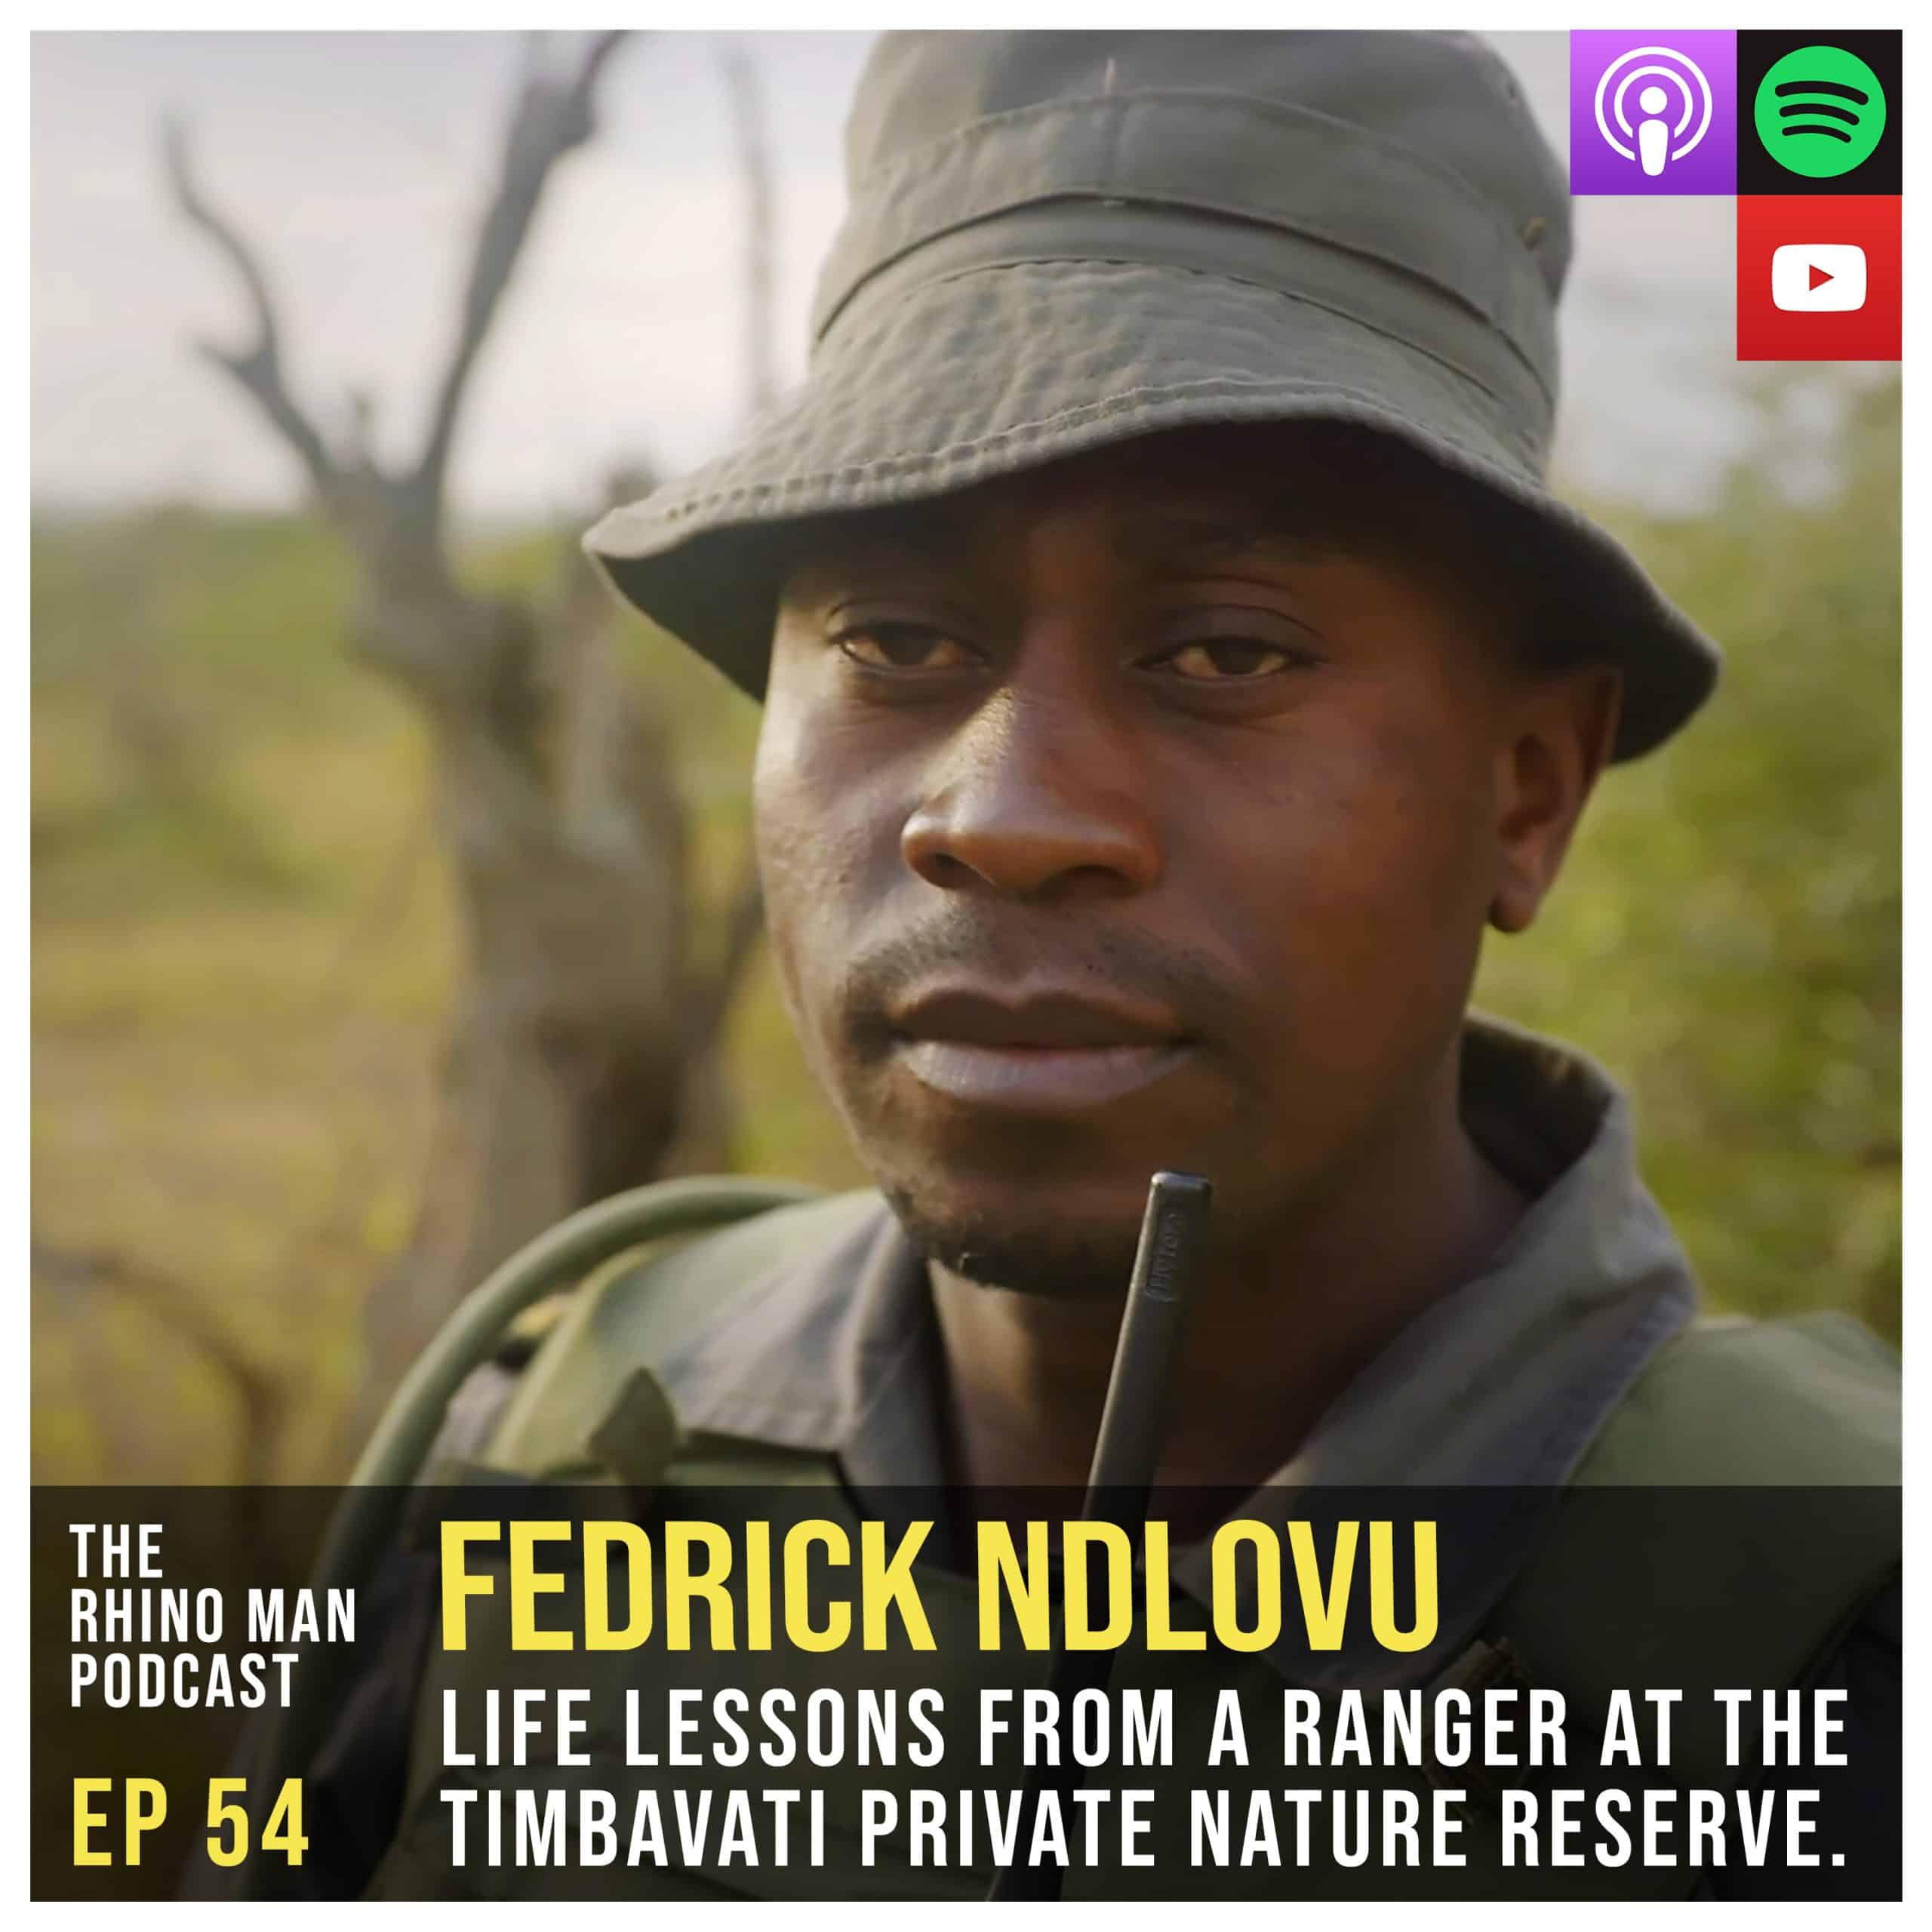 Ep 54: Fedrick Ndlovu – Life lessons from a ranger at the Timbavati Private Nature Reserve.